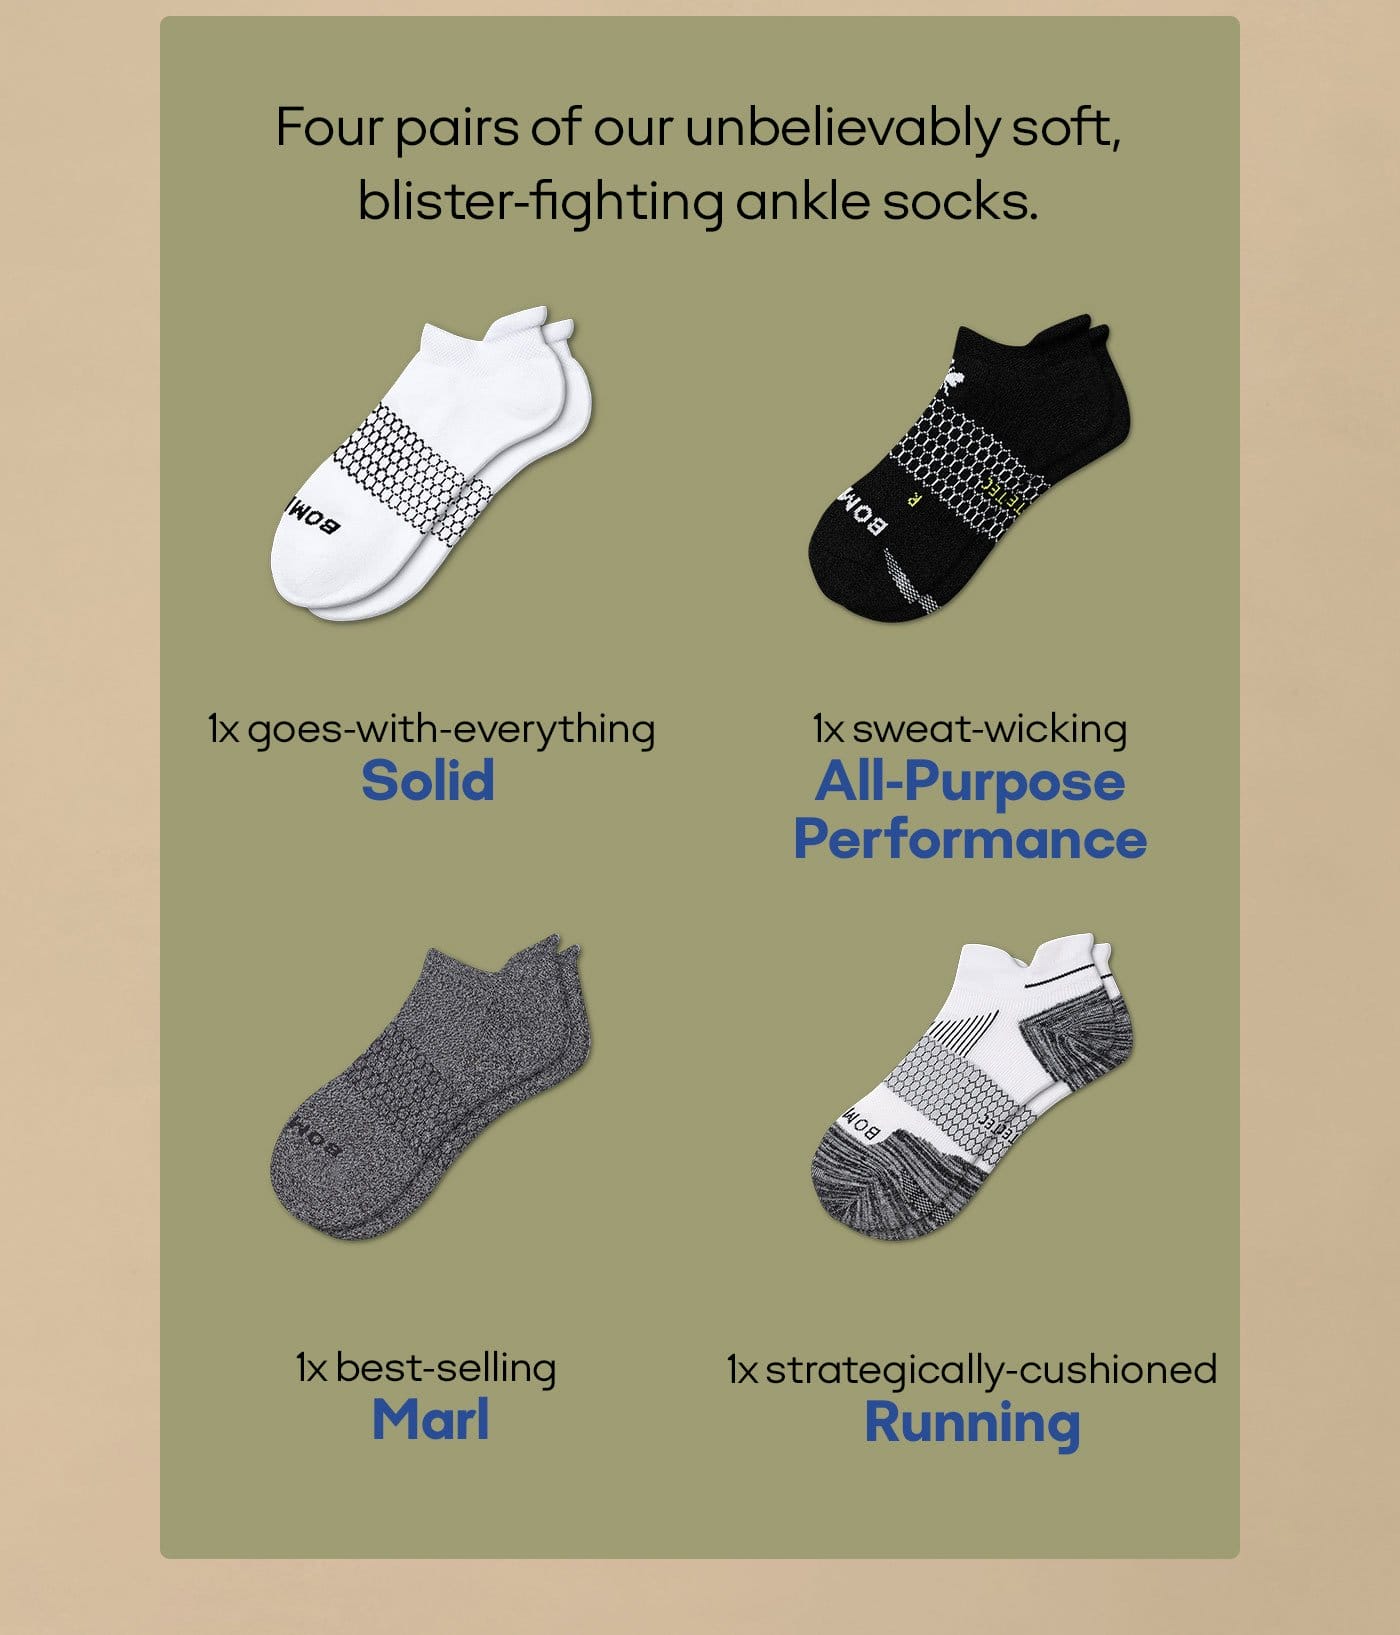 Four pairs of our unbelievably soft, blister-fighting ankle socks.